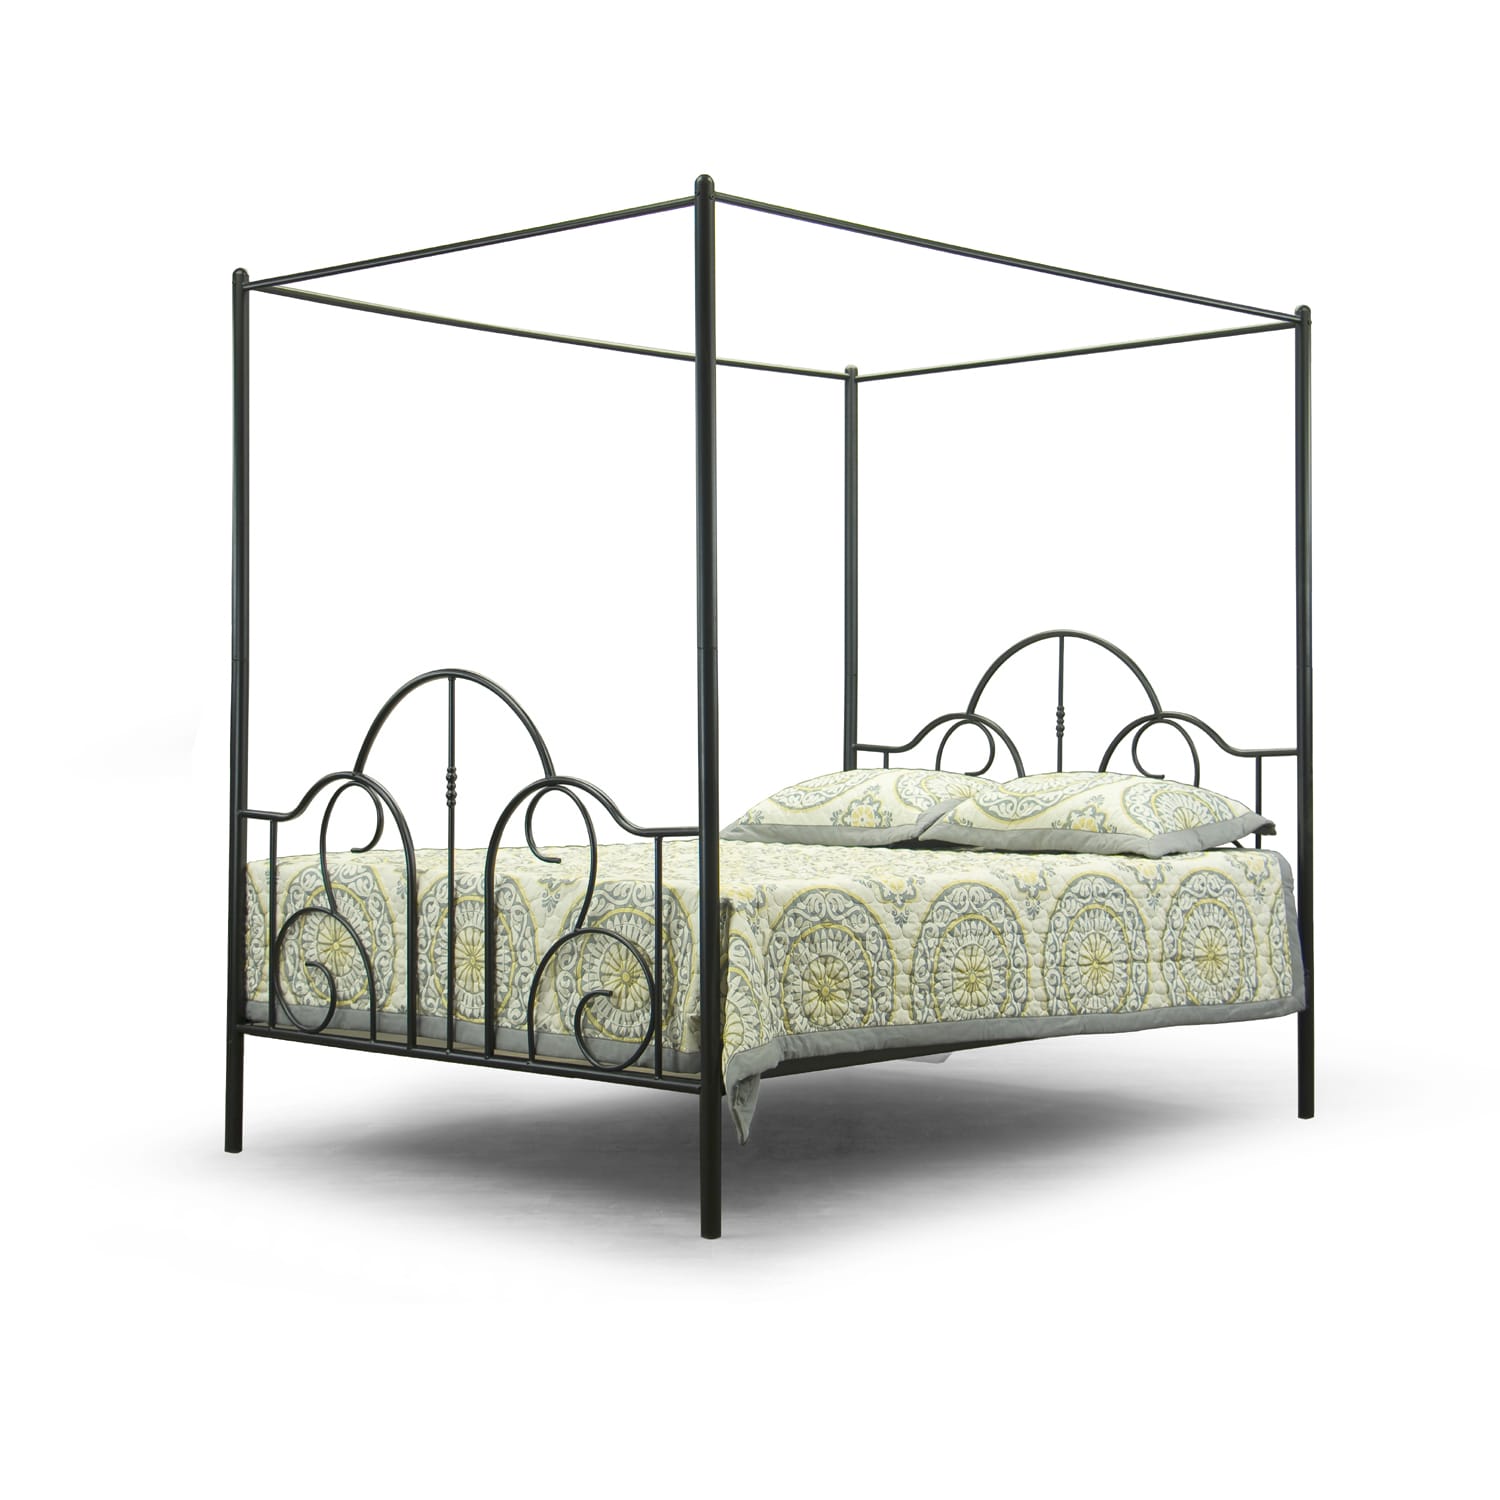 Baxton Studio Monticello Metal Contemporary Queen Size Canopy Bed Frame